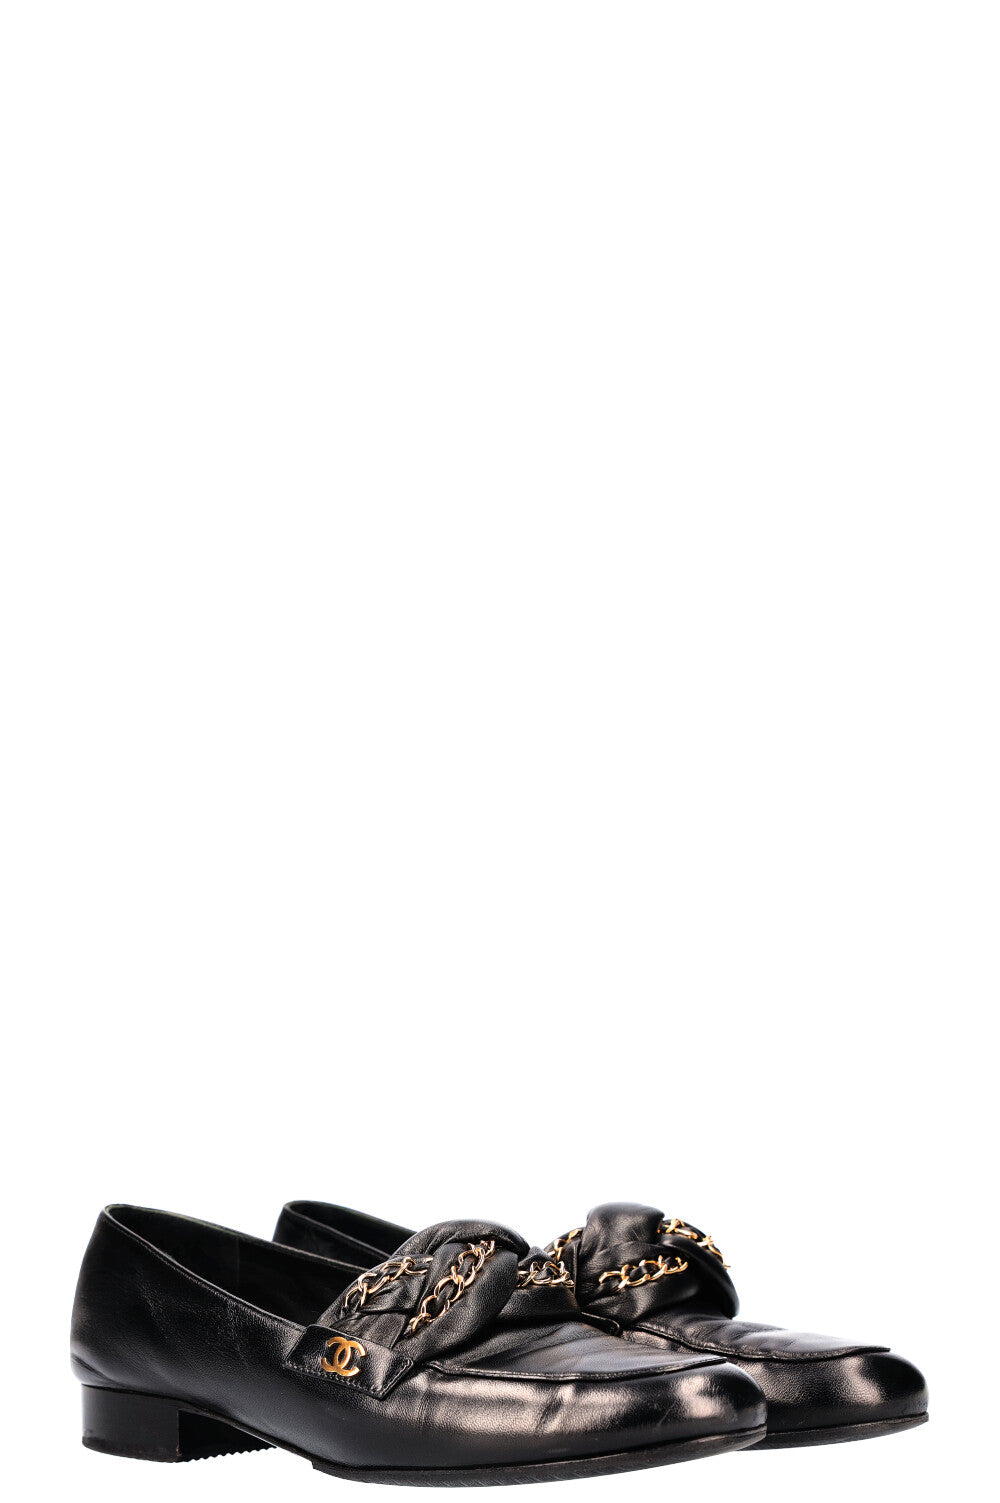 CHANEL Braided Chain Loafer Flats Black